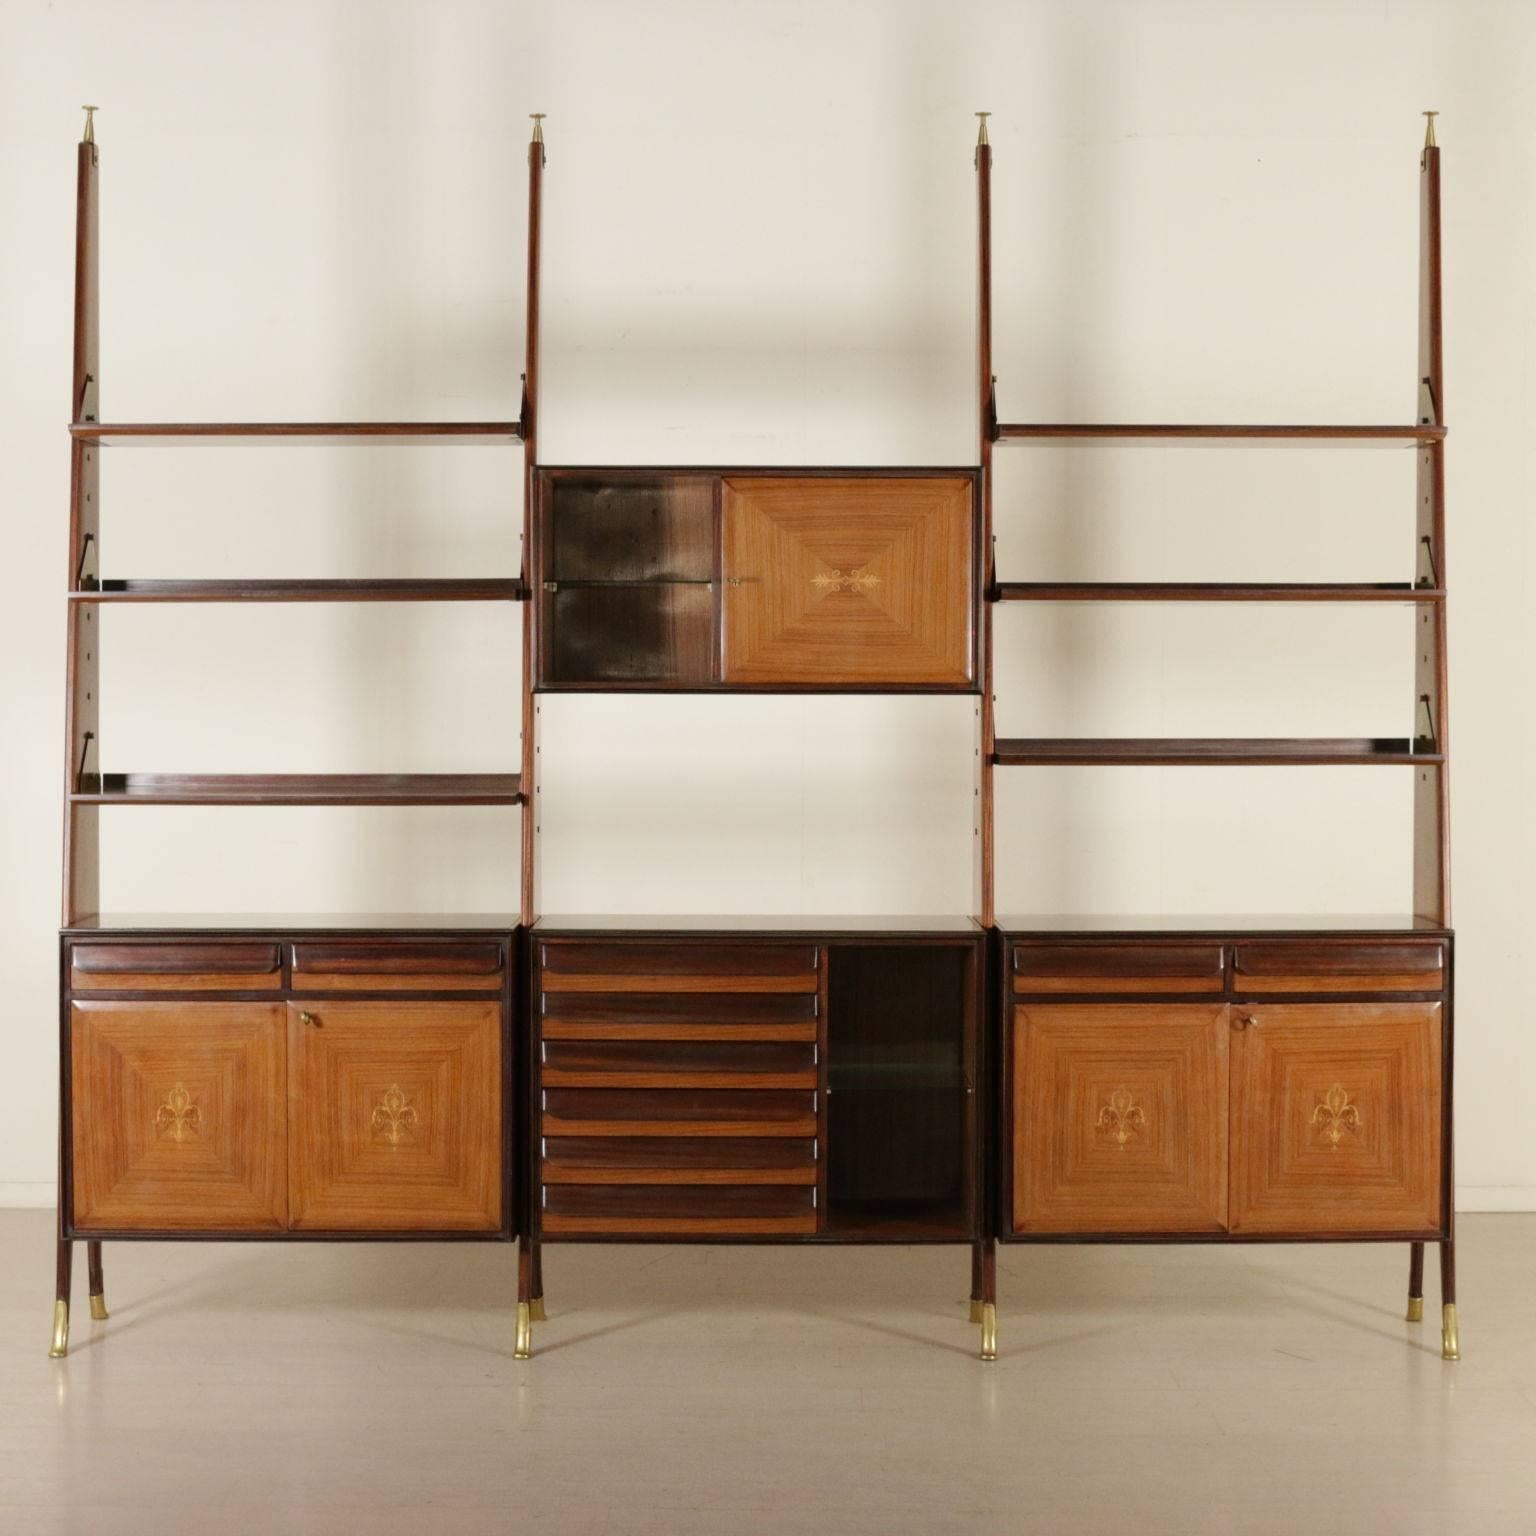 A bookcase with adjustable shelves in height and containers. Rosewood veneer with inlaid decorations, brass. Manufactured in Italy, 1950s-1960s.